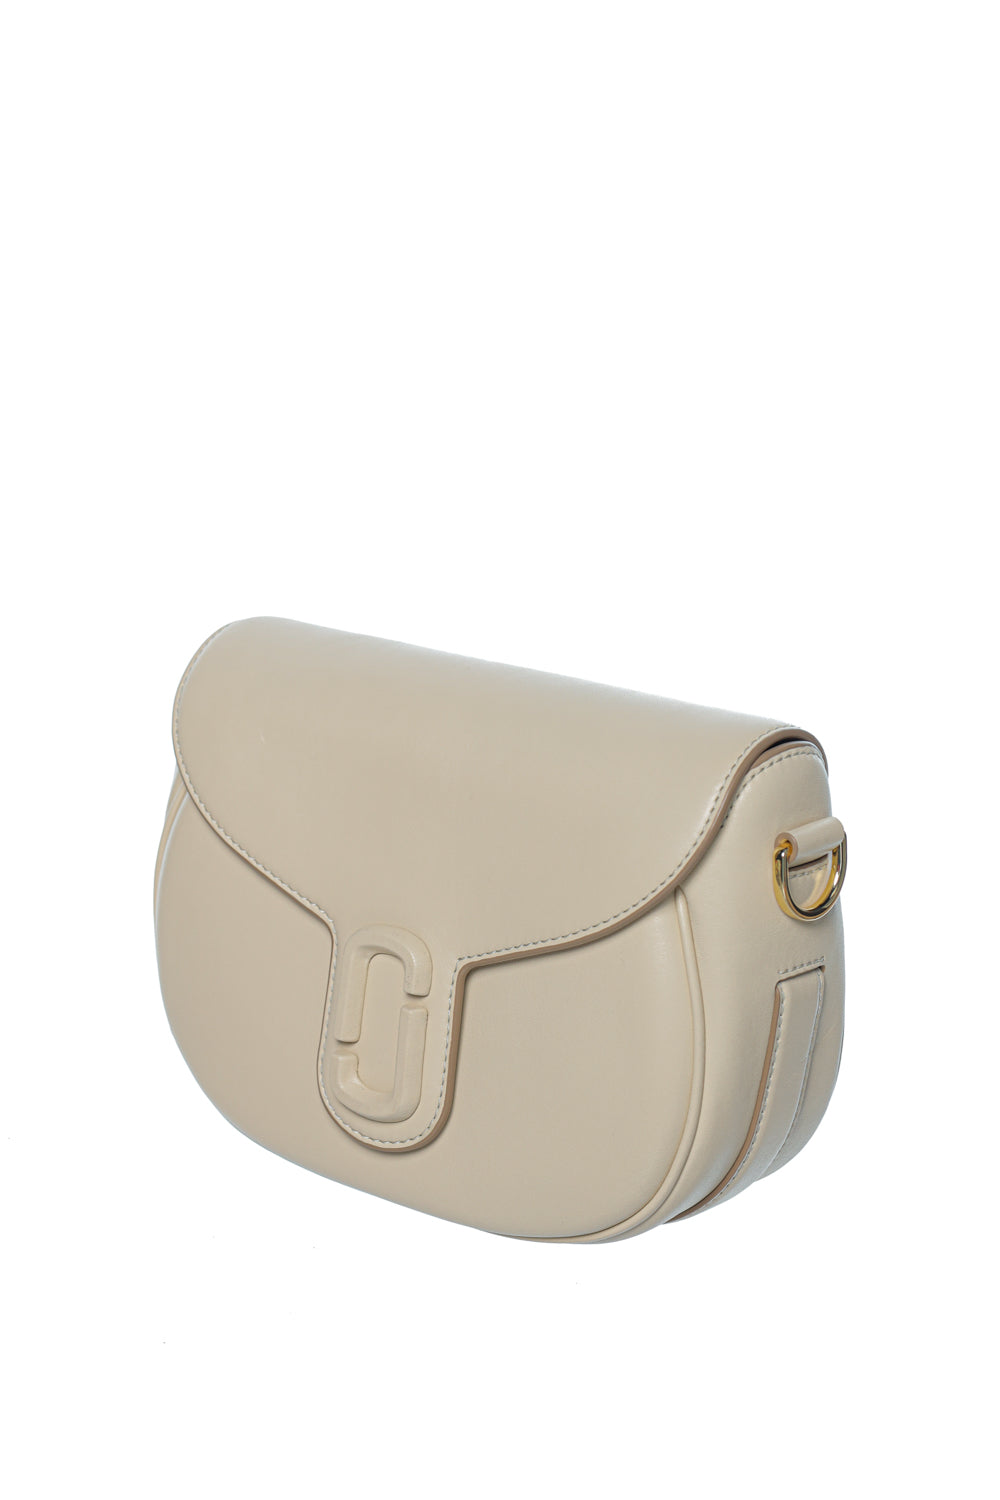 Geanta Marc Jacobs The Large Saddle